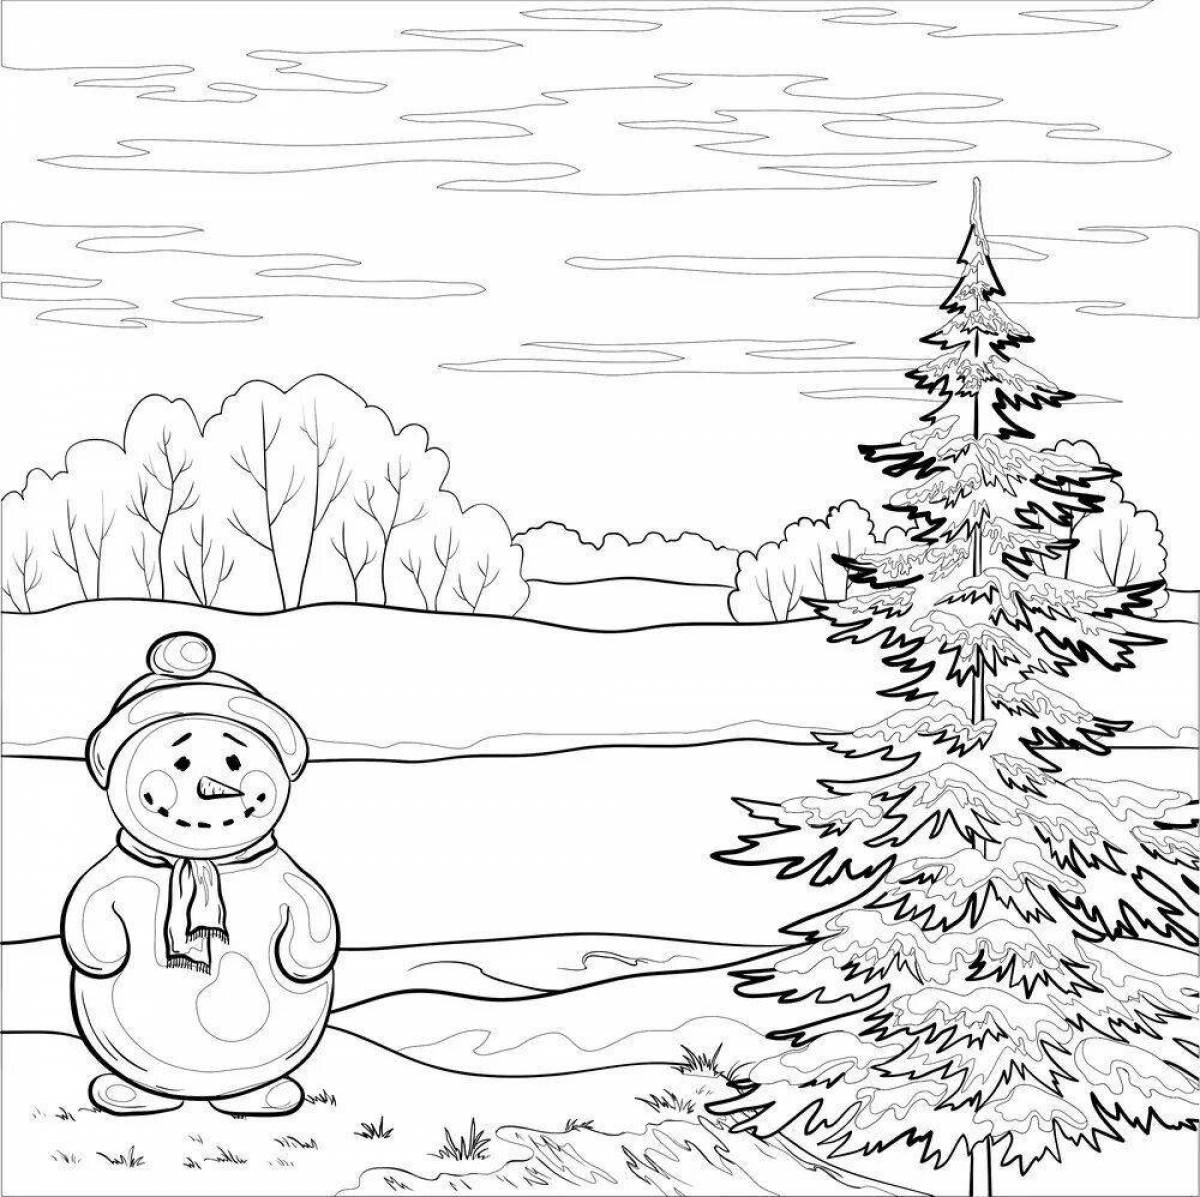 Coloring book shining winter nature